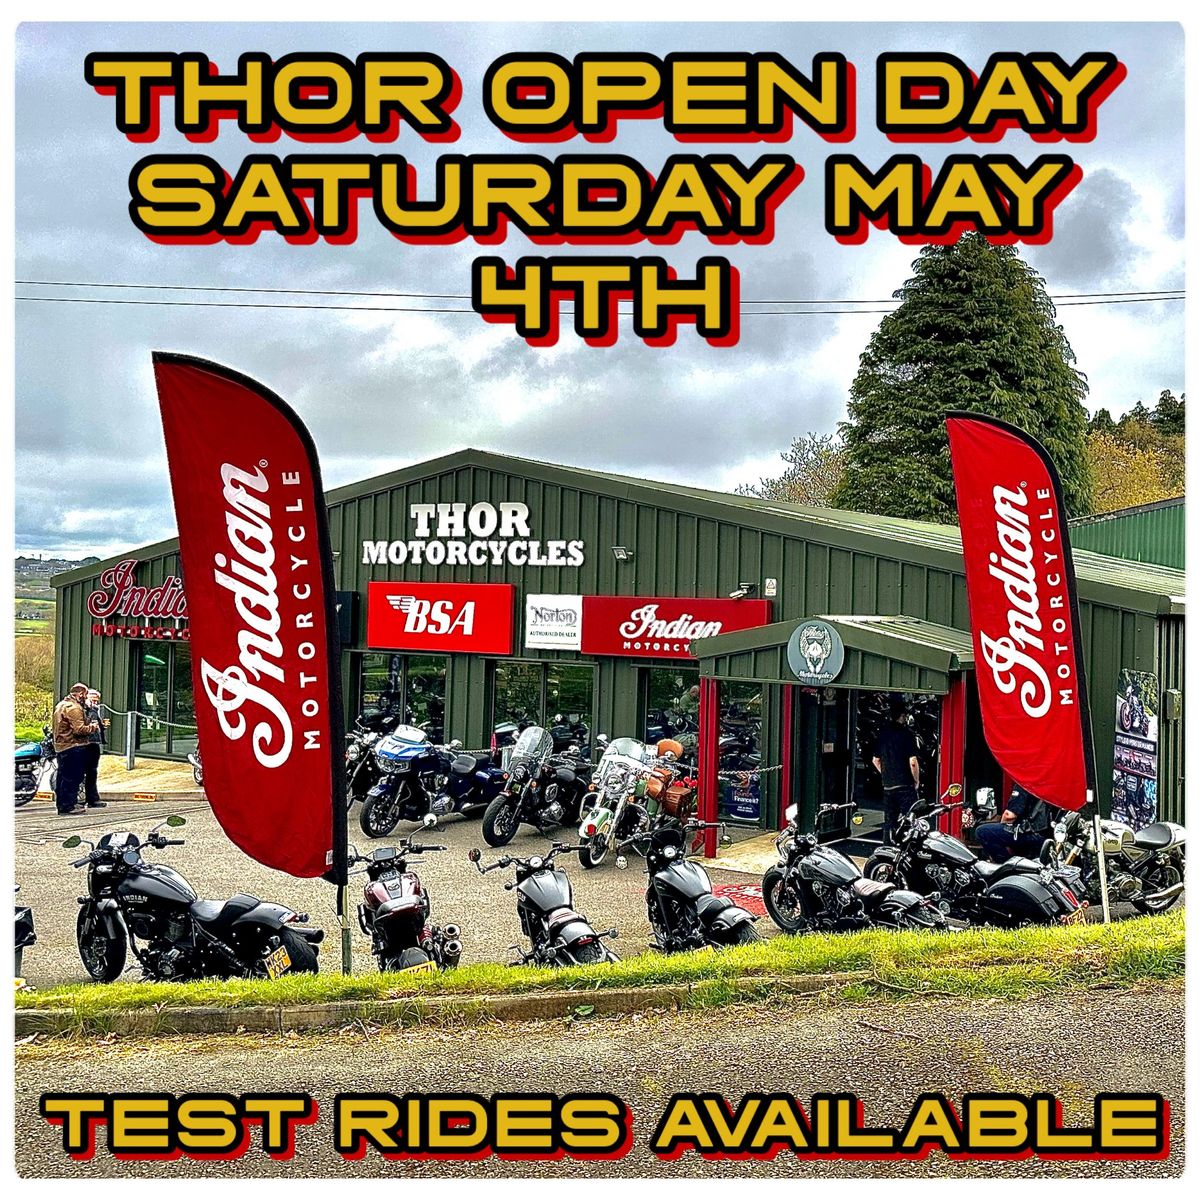 Thor motorcycles open day 